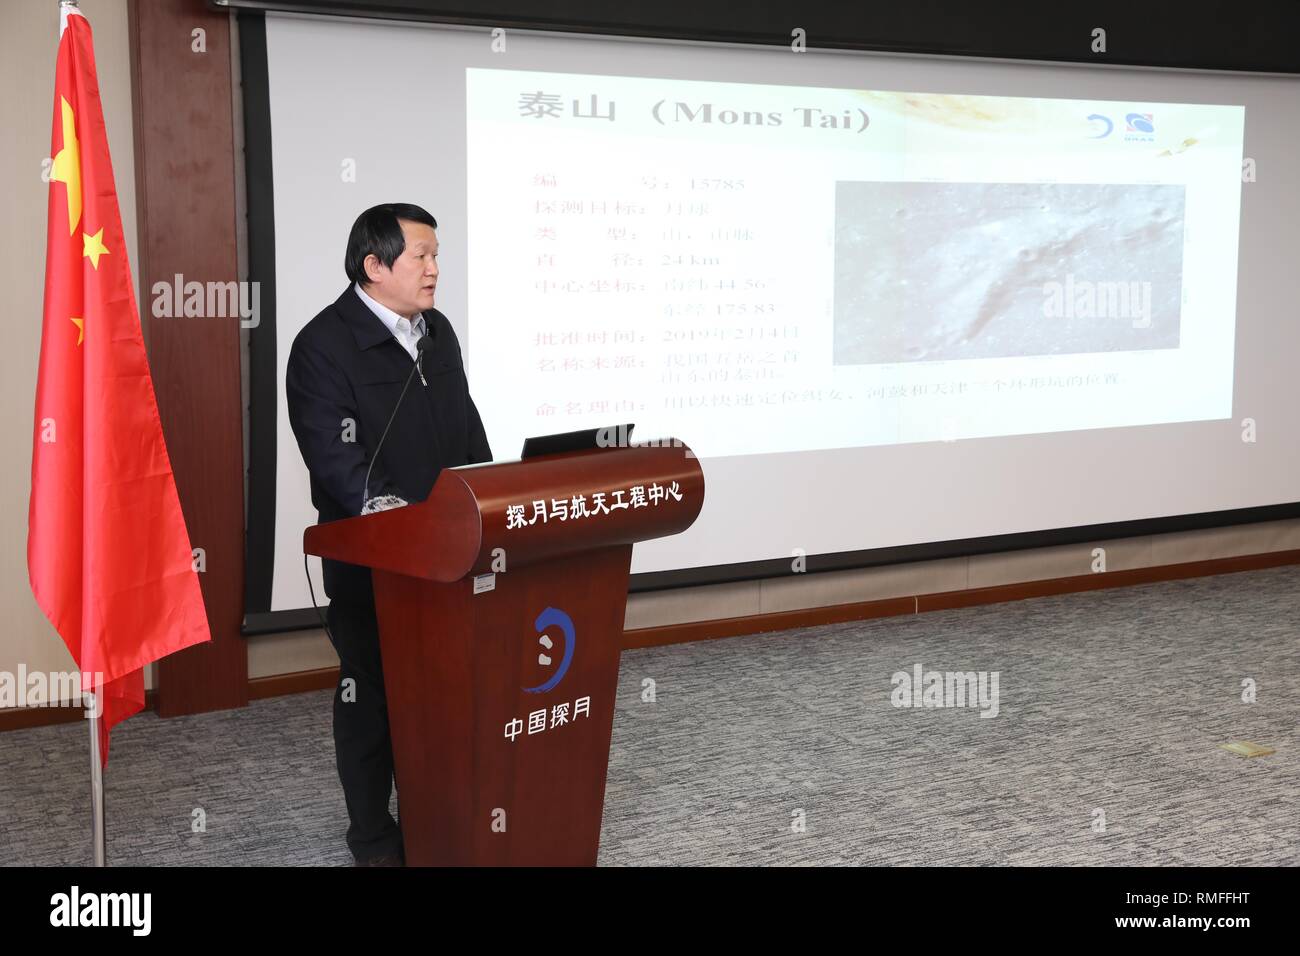 (190215) -- BEIJING, Feb. 15, 2019 (Xinhua) --     Li Chunlai, deputy director of the National Astronomical Observatories of China and commander-in-chief of the ground application system of Chang'e-4, is seen at a joint press conference held in Beijing on Feb. 15, 2019.     The landing site of China's Chang'e-4 lunar probe has been named 'Statio Tianhe' after the spacecraft made the first-ever soft landing on the far side of the moon last month.     Together with three nearby impact craters and one hill, the name was approved by the International Astronomical Union (IAU), Liu Jizhong, director Stock Photo